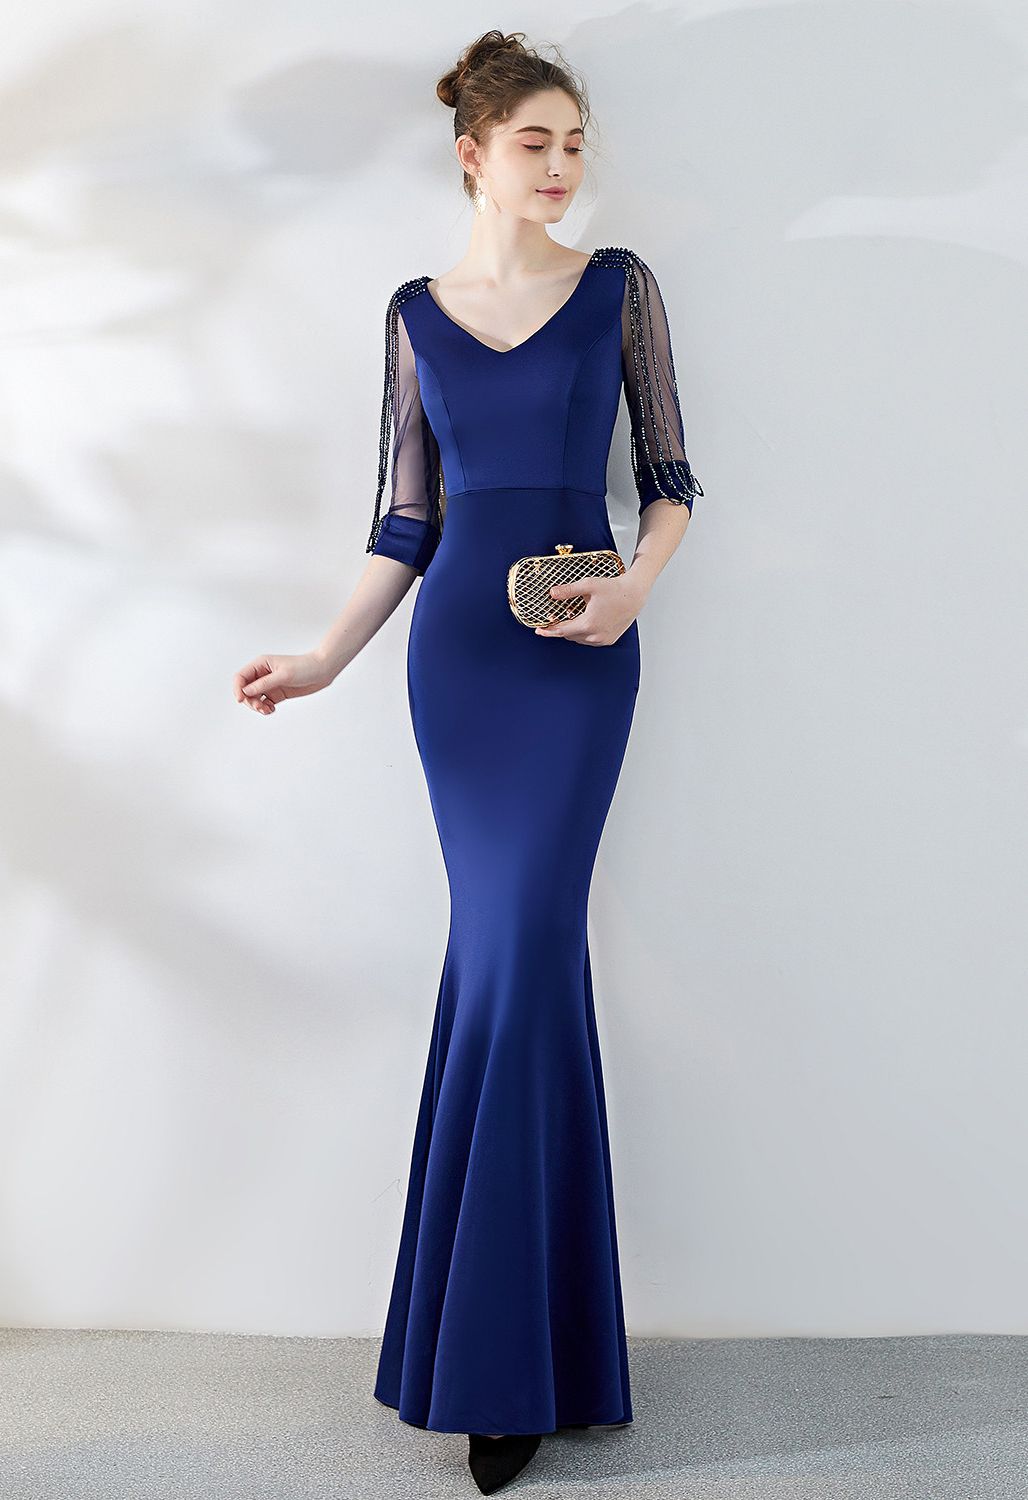 Draped Bead Mesh Sleeve Gown in Navy - Retro, Indie and Unique Fashion